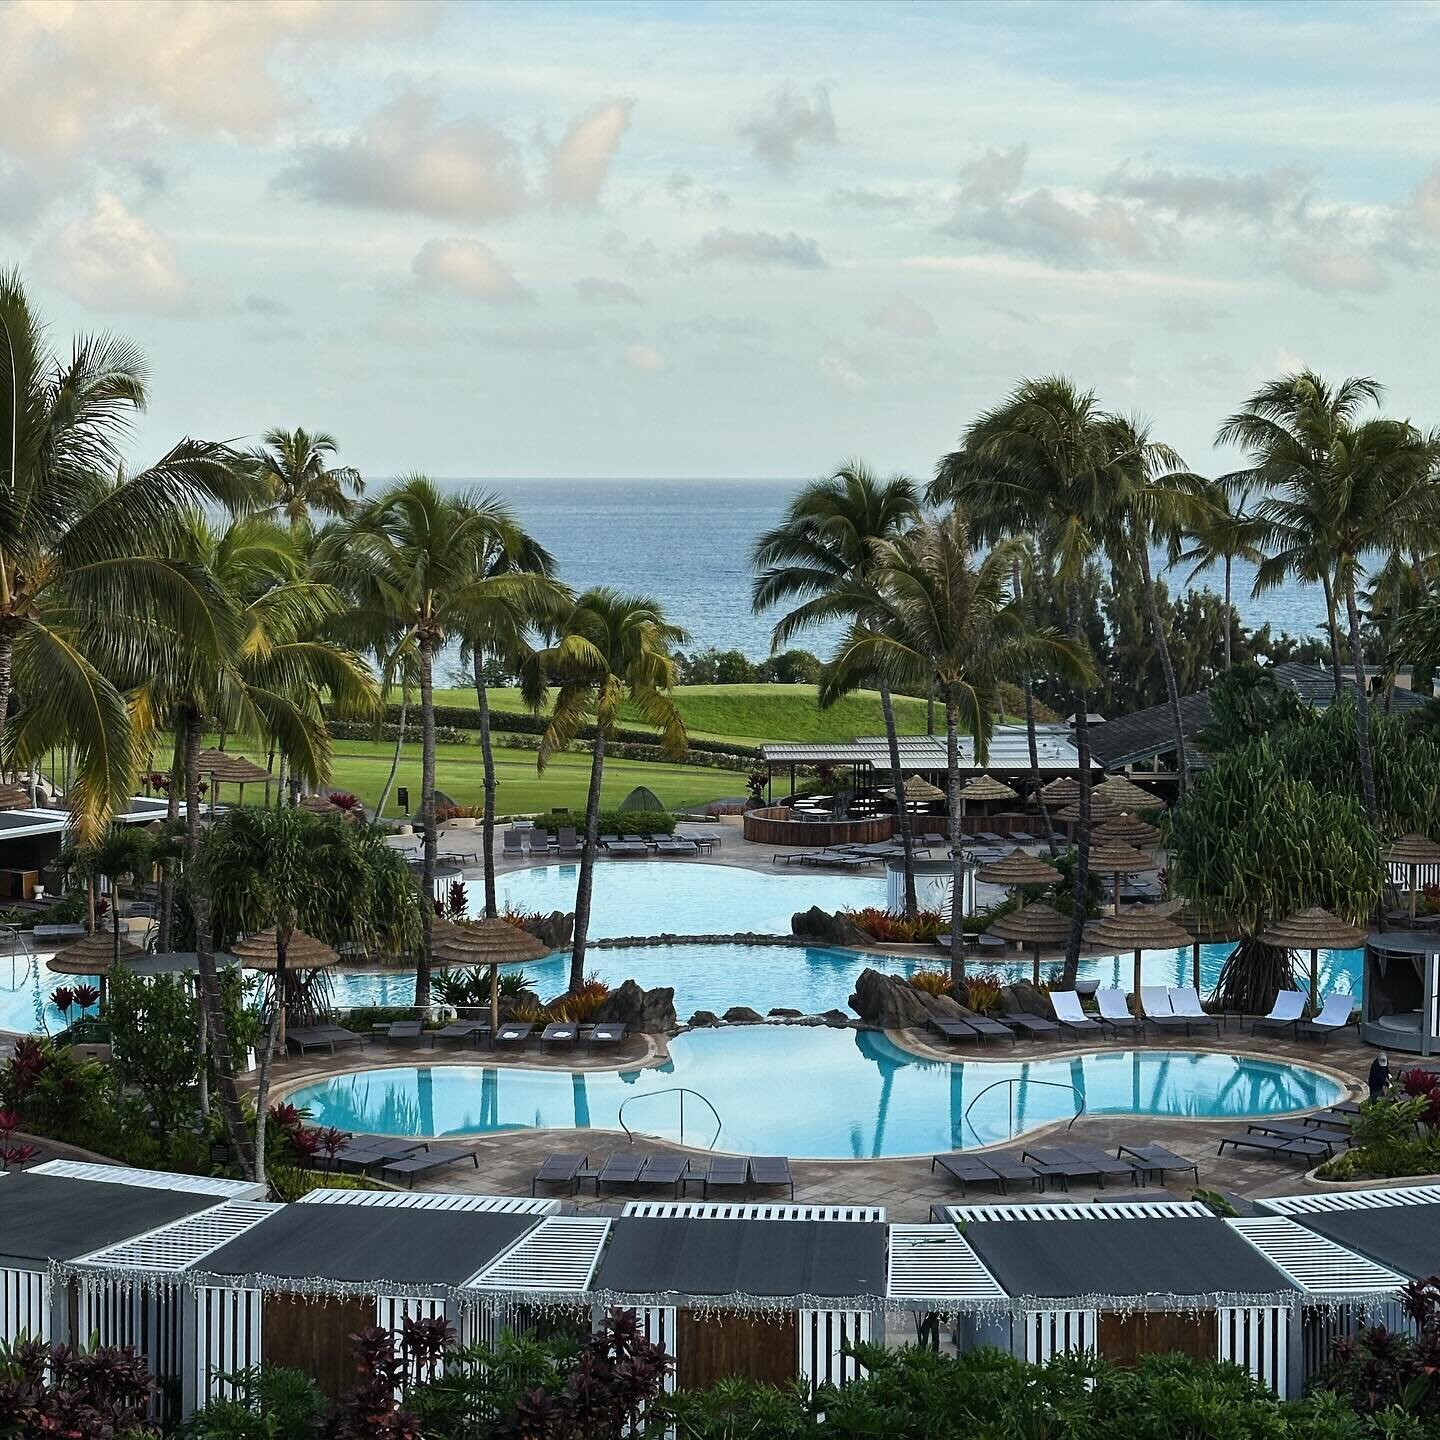 A perfect way to escape winter chills! @ritzcarltonkapalua 
This ocean front gem is for anyone who loves beach, golf, tennis, pickleball, hiking or just relaxing by the pool. 
Mahalo to the team at this glorious place! 
#mauistrong #luxurytravel #vir